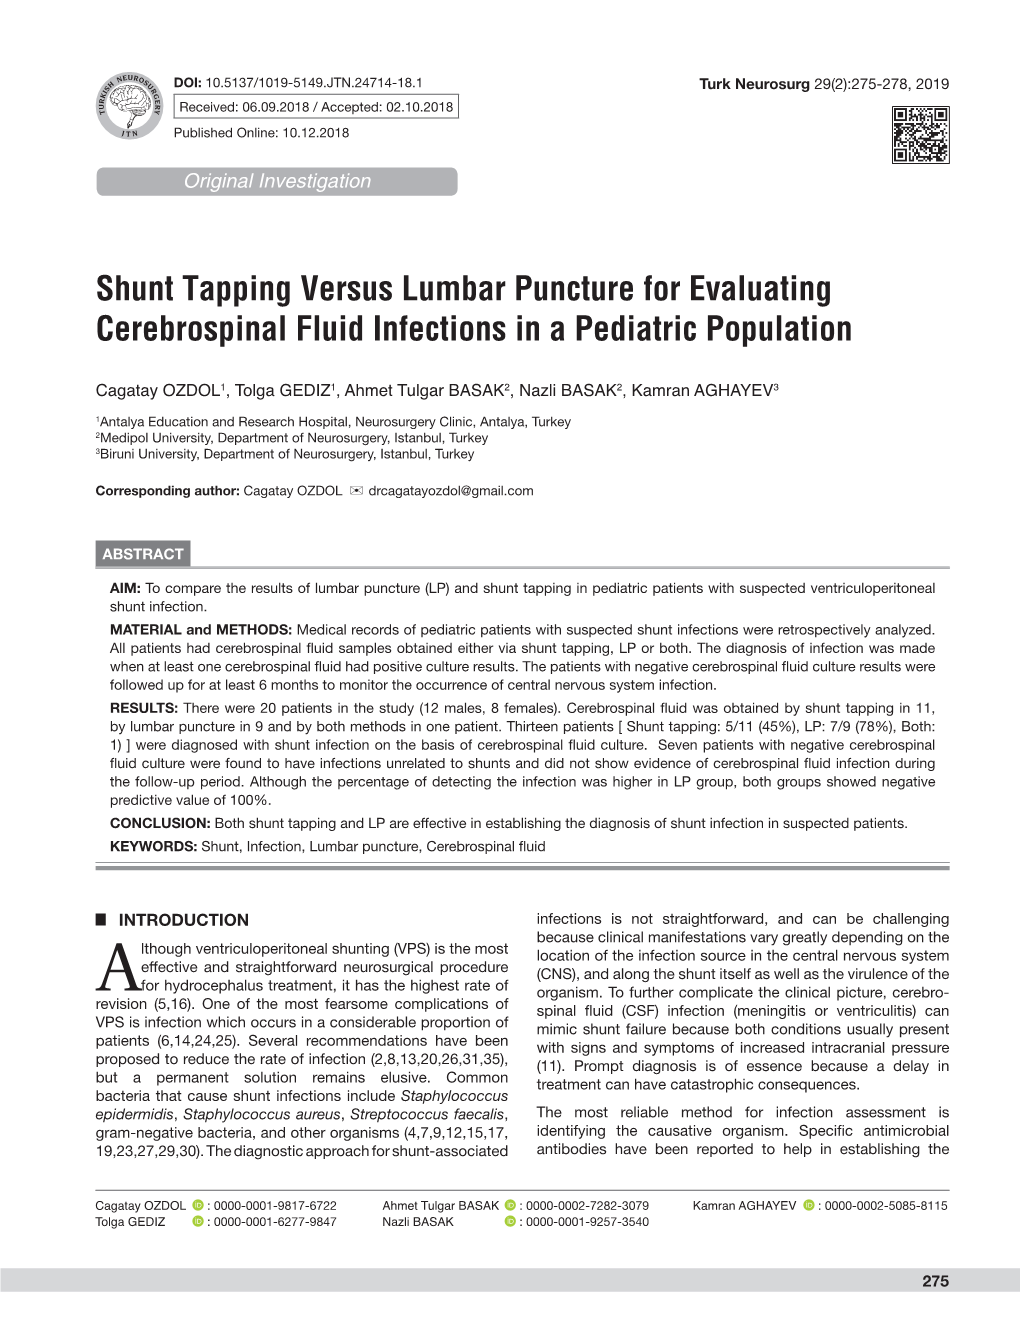 Shunt Tapping Versus Lumbar Puncture for Evaluating Cerebrospinal Fluid Infections in a Pediatric Population